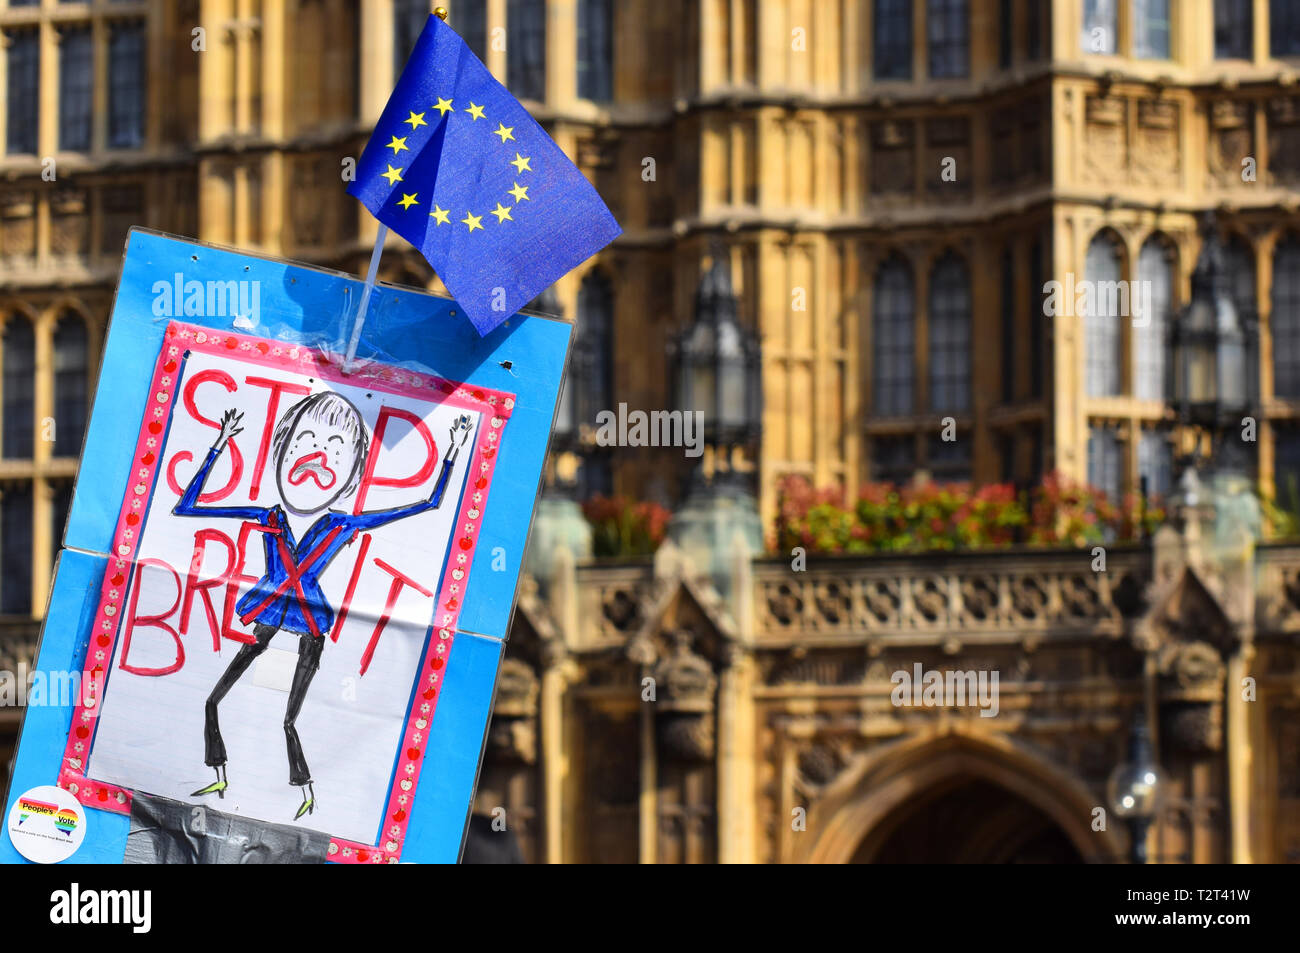 A Stop Brexit Protest Sign showing a cartoon drawing of Theresa May being waved in front of the House of Commons, Westminster, London UK Stock Photo